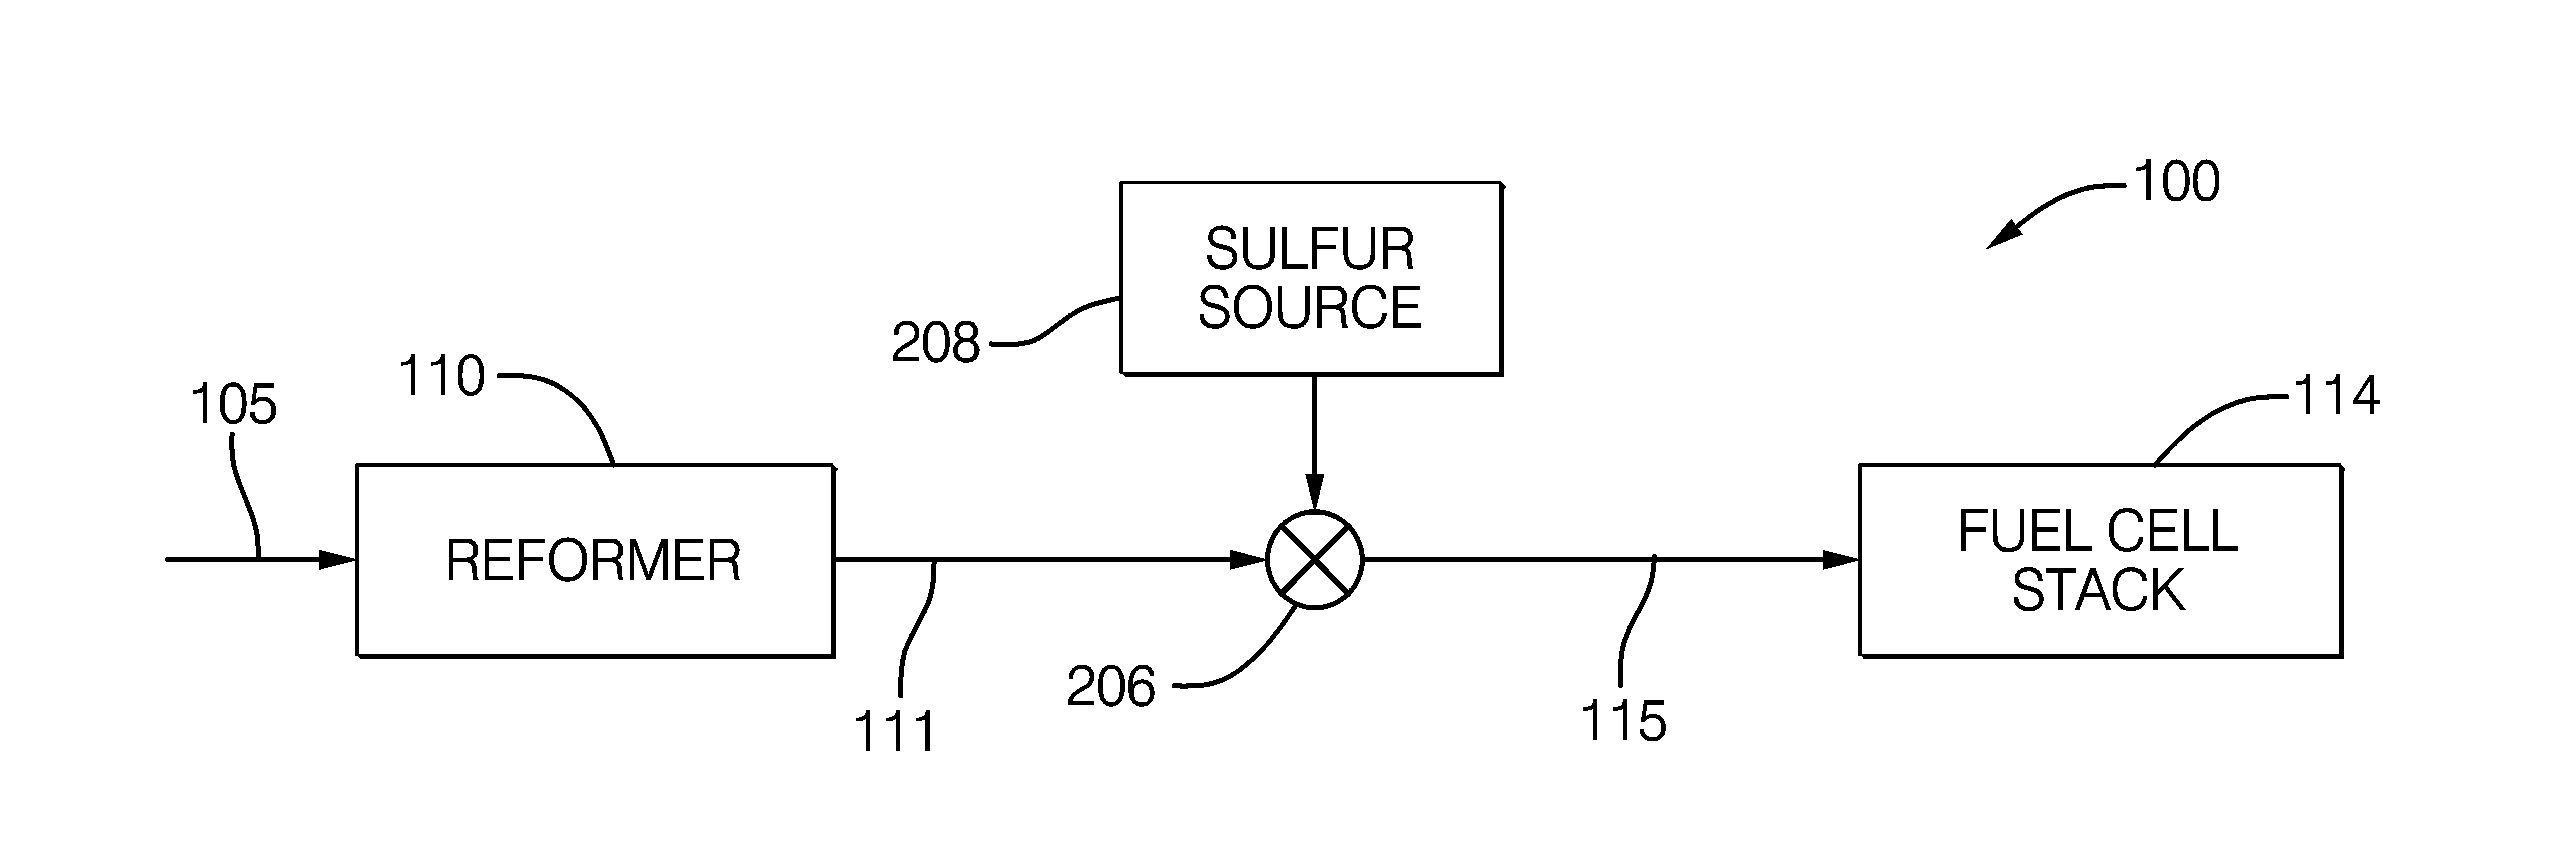 System for adding sulfur to a fuel cell stack system for improved fuel cell stability